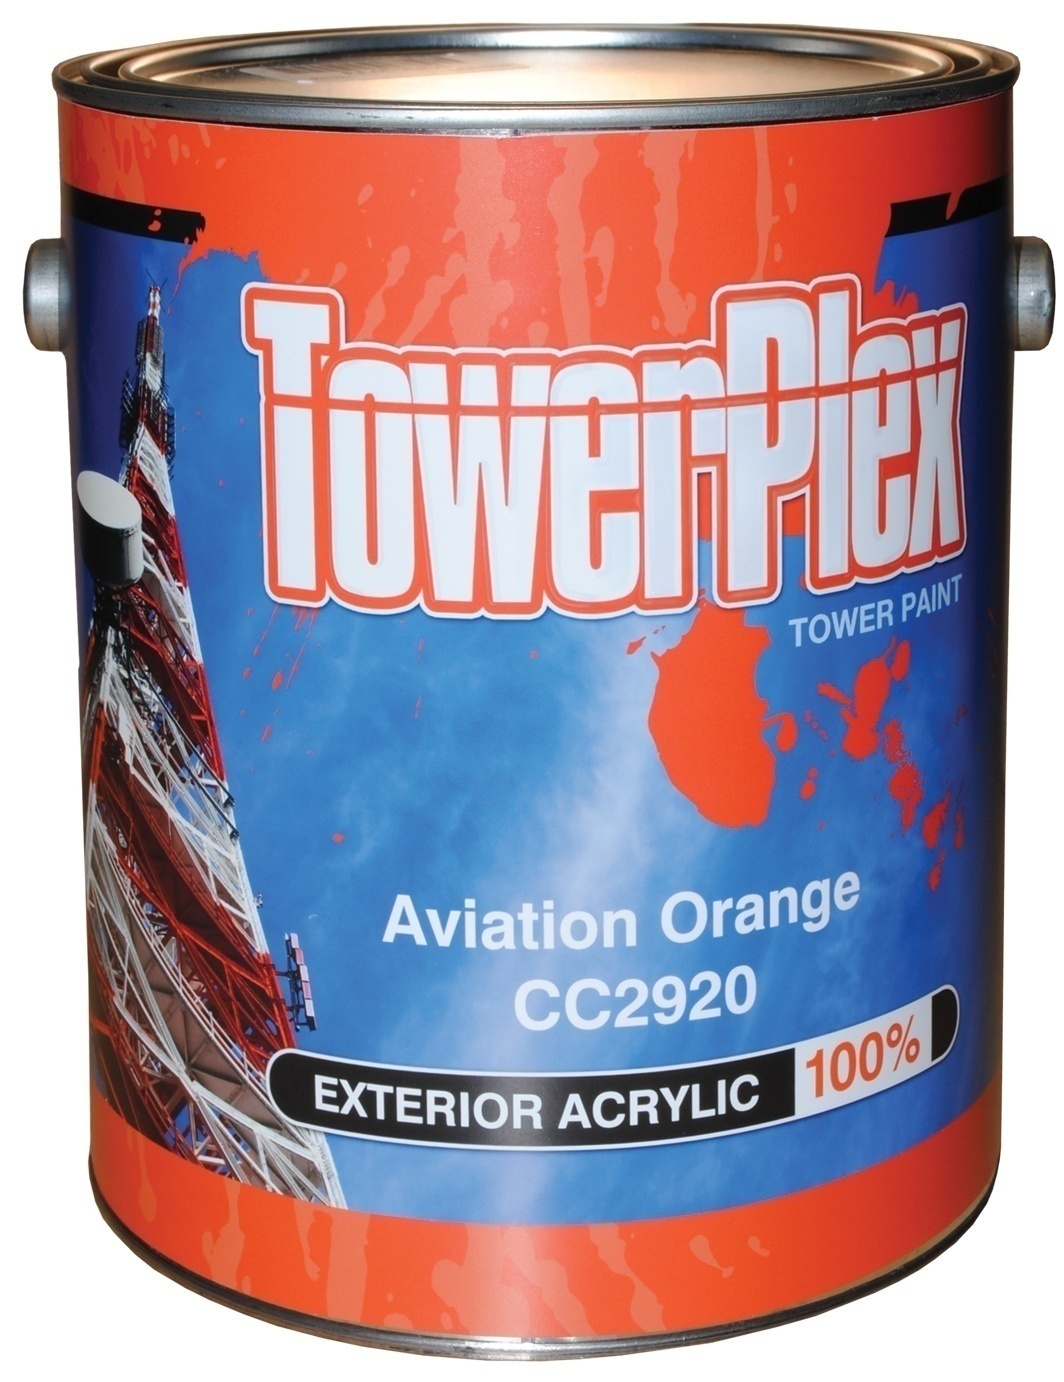 CC2920 TowerPlex Aviation Orange Tower Paint (1 Gallon Pail) from Columbia Safety